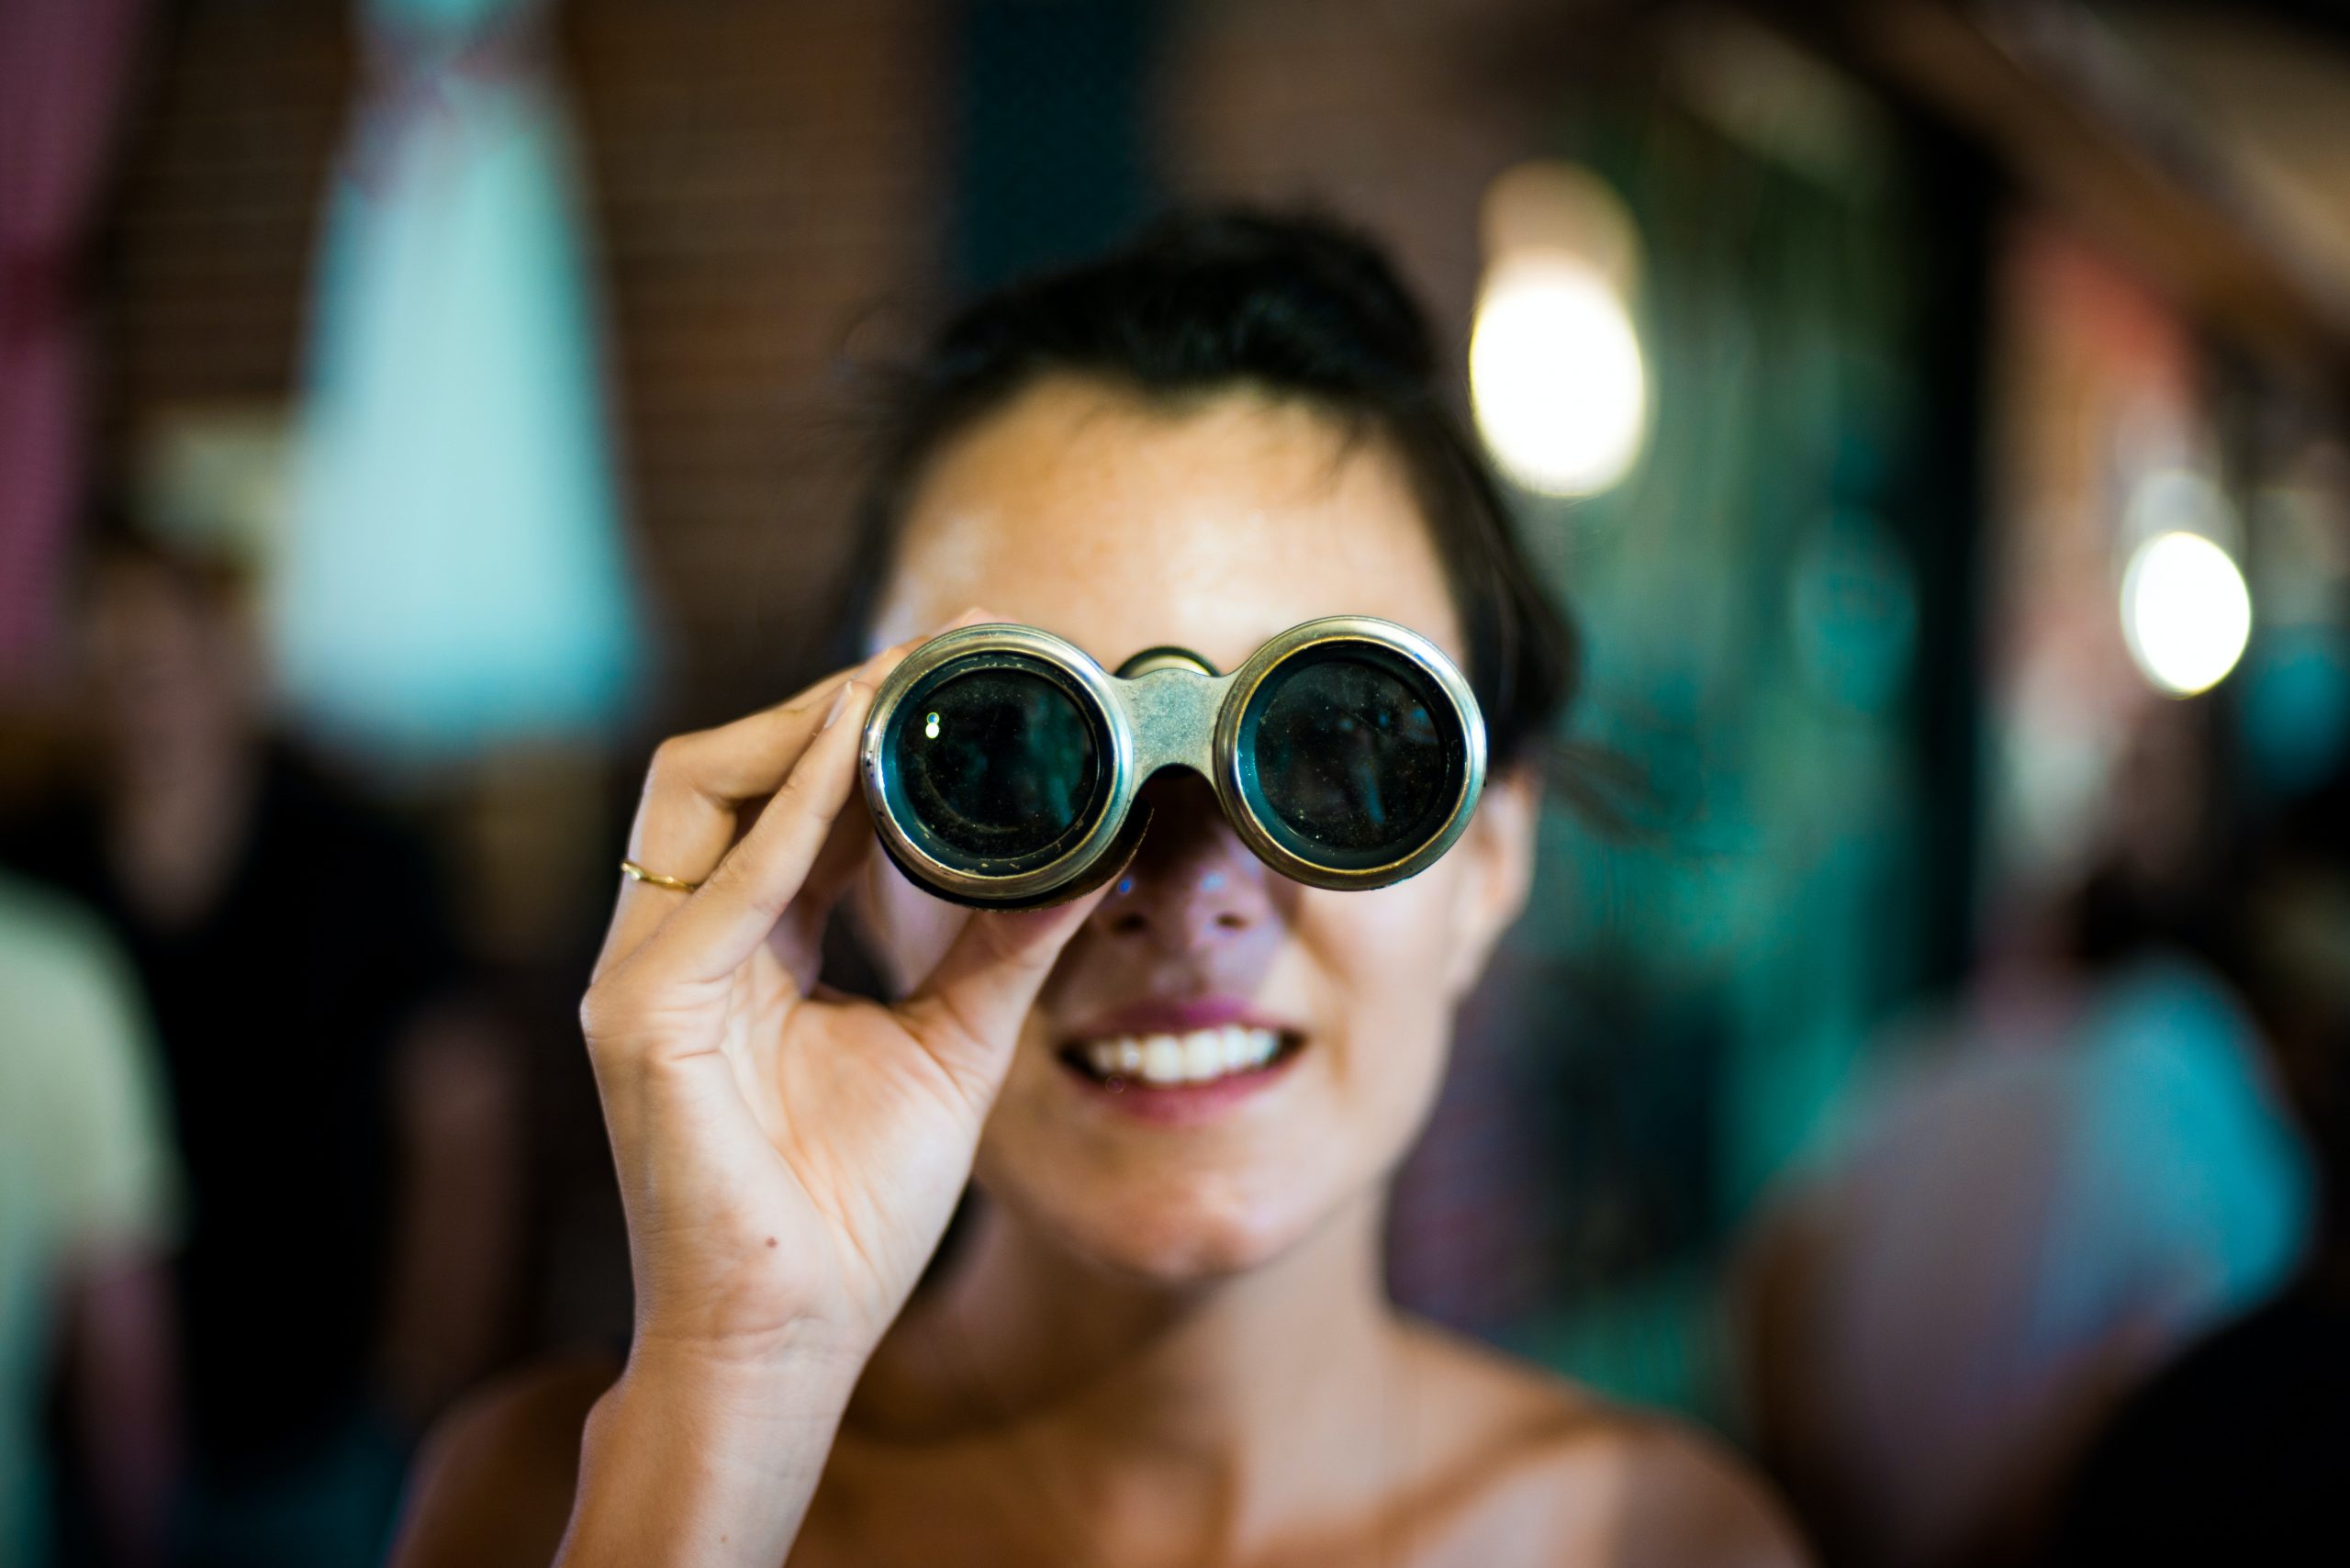 A young woman looks through a pair of binoculars.